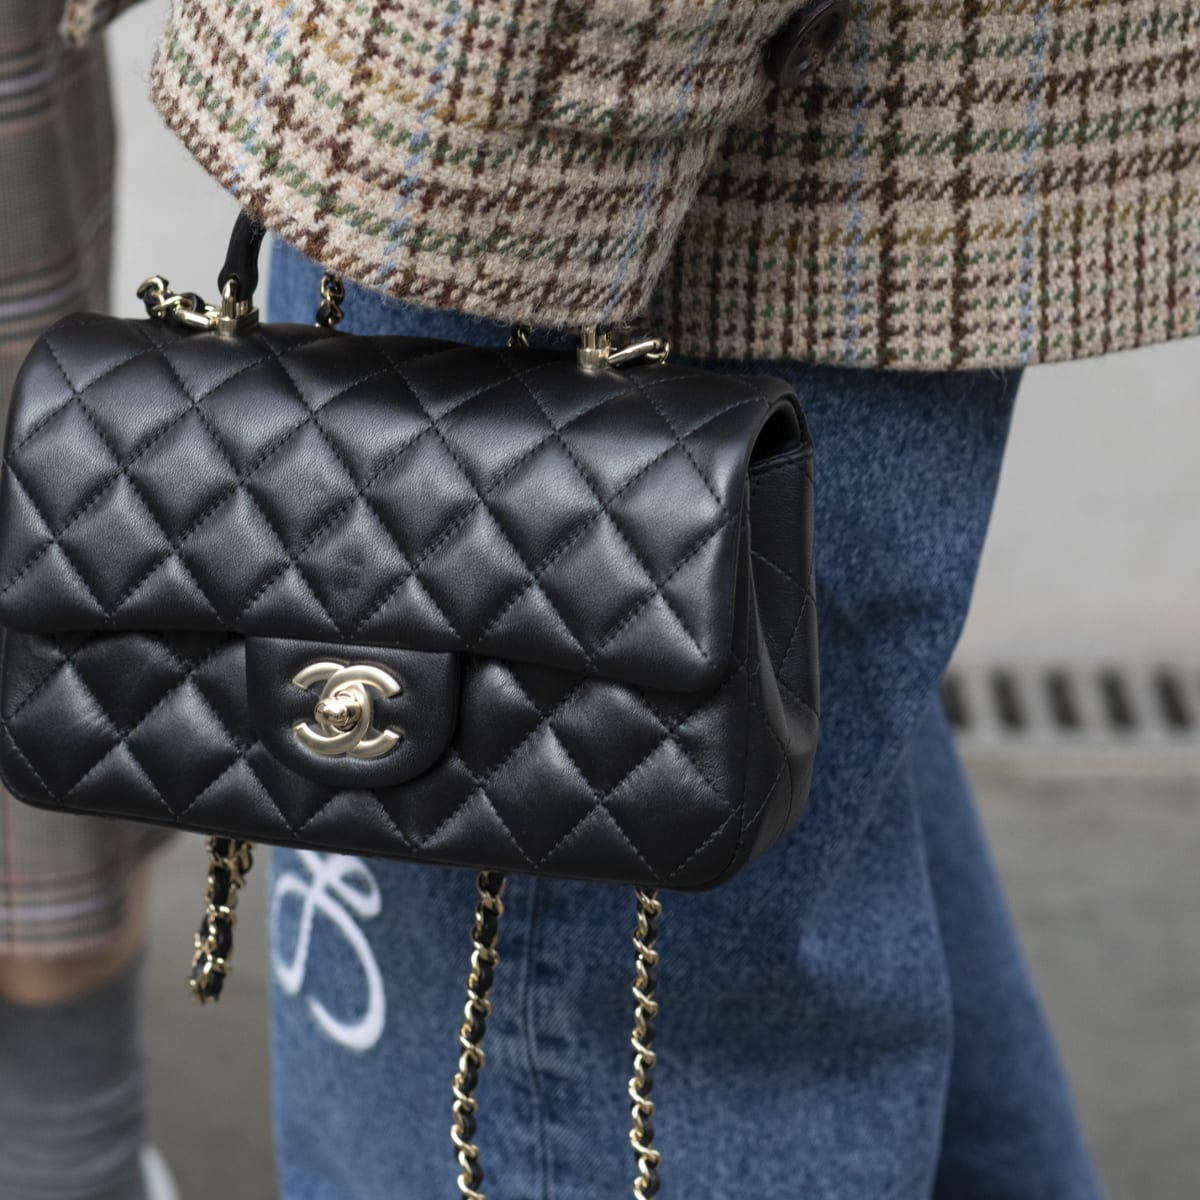 Chanel Fall Winter 2020/21 Collection- New Bags & Shoes + Louis